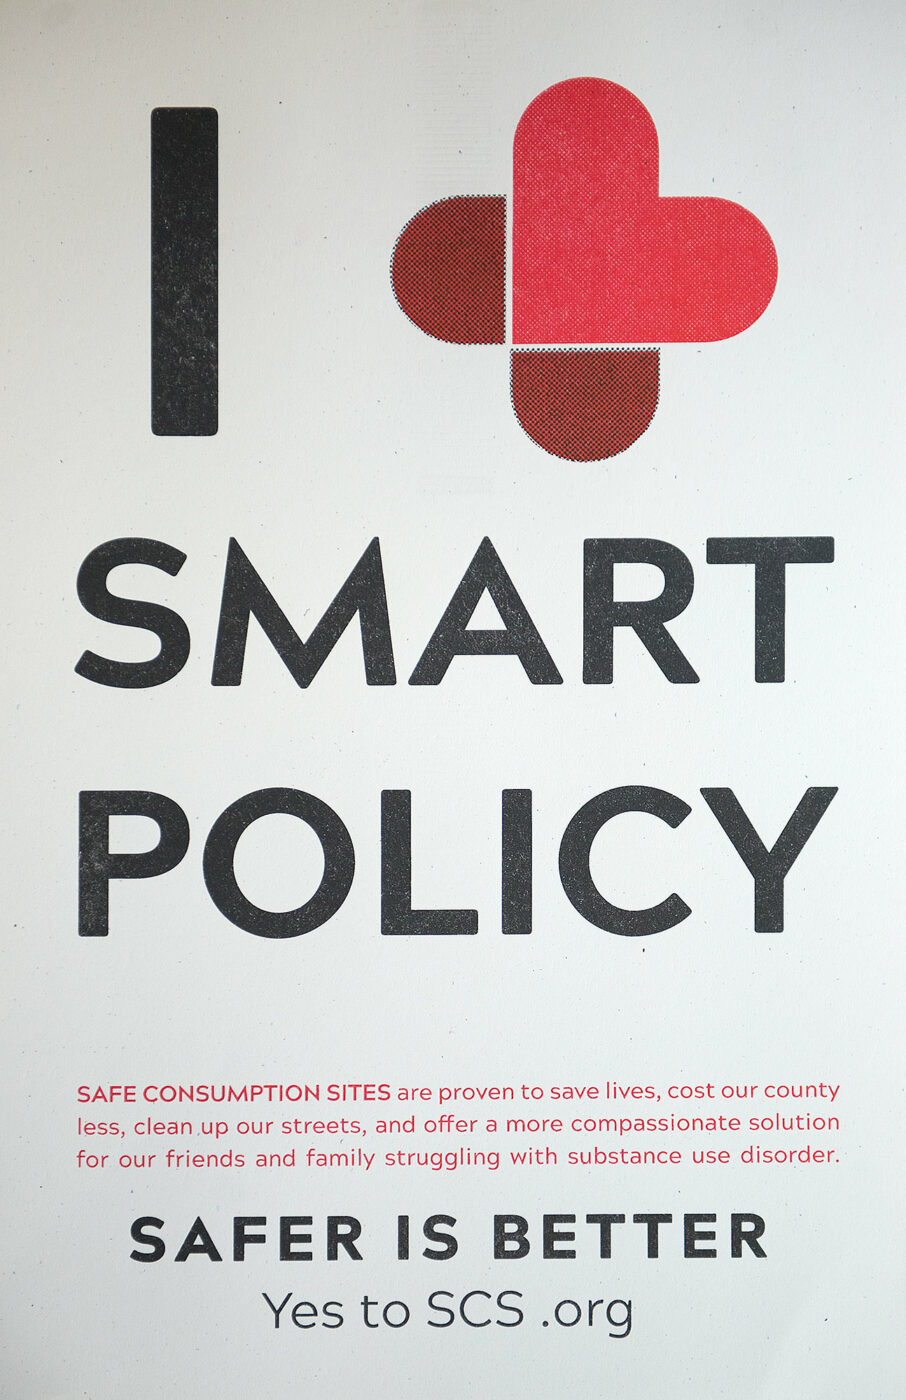 I Heart Smart Policy - print produced for the campaign